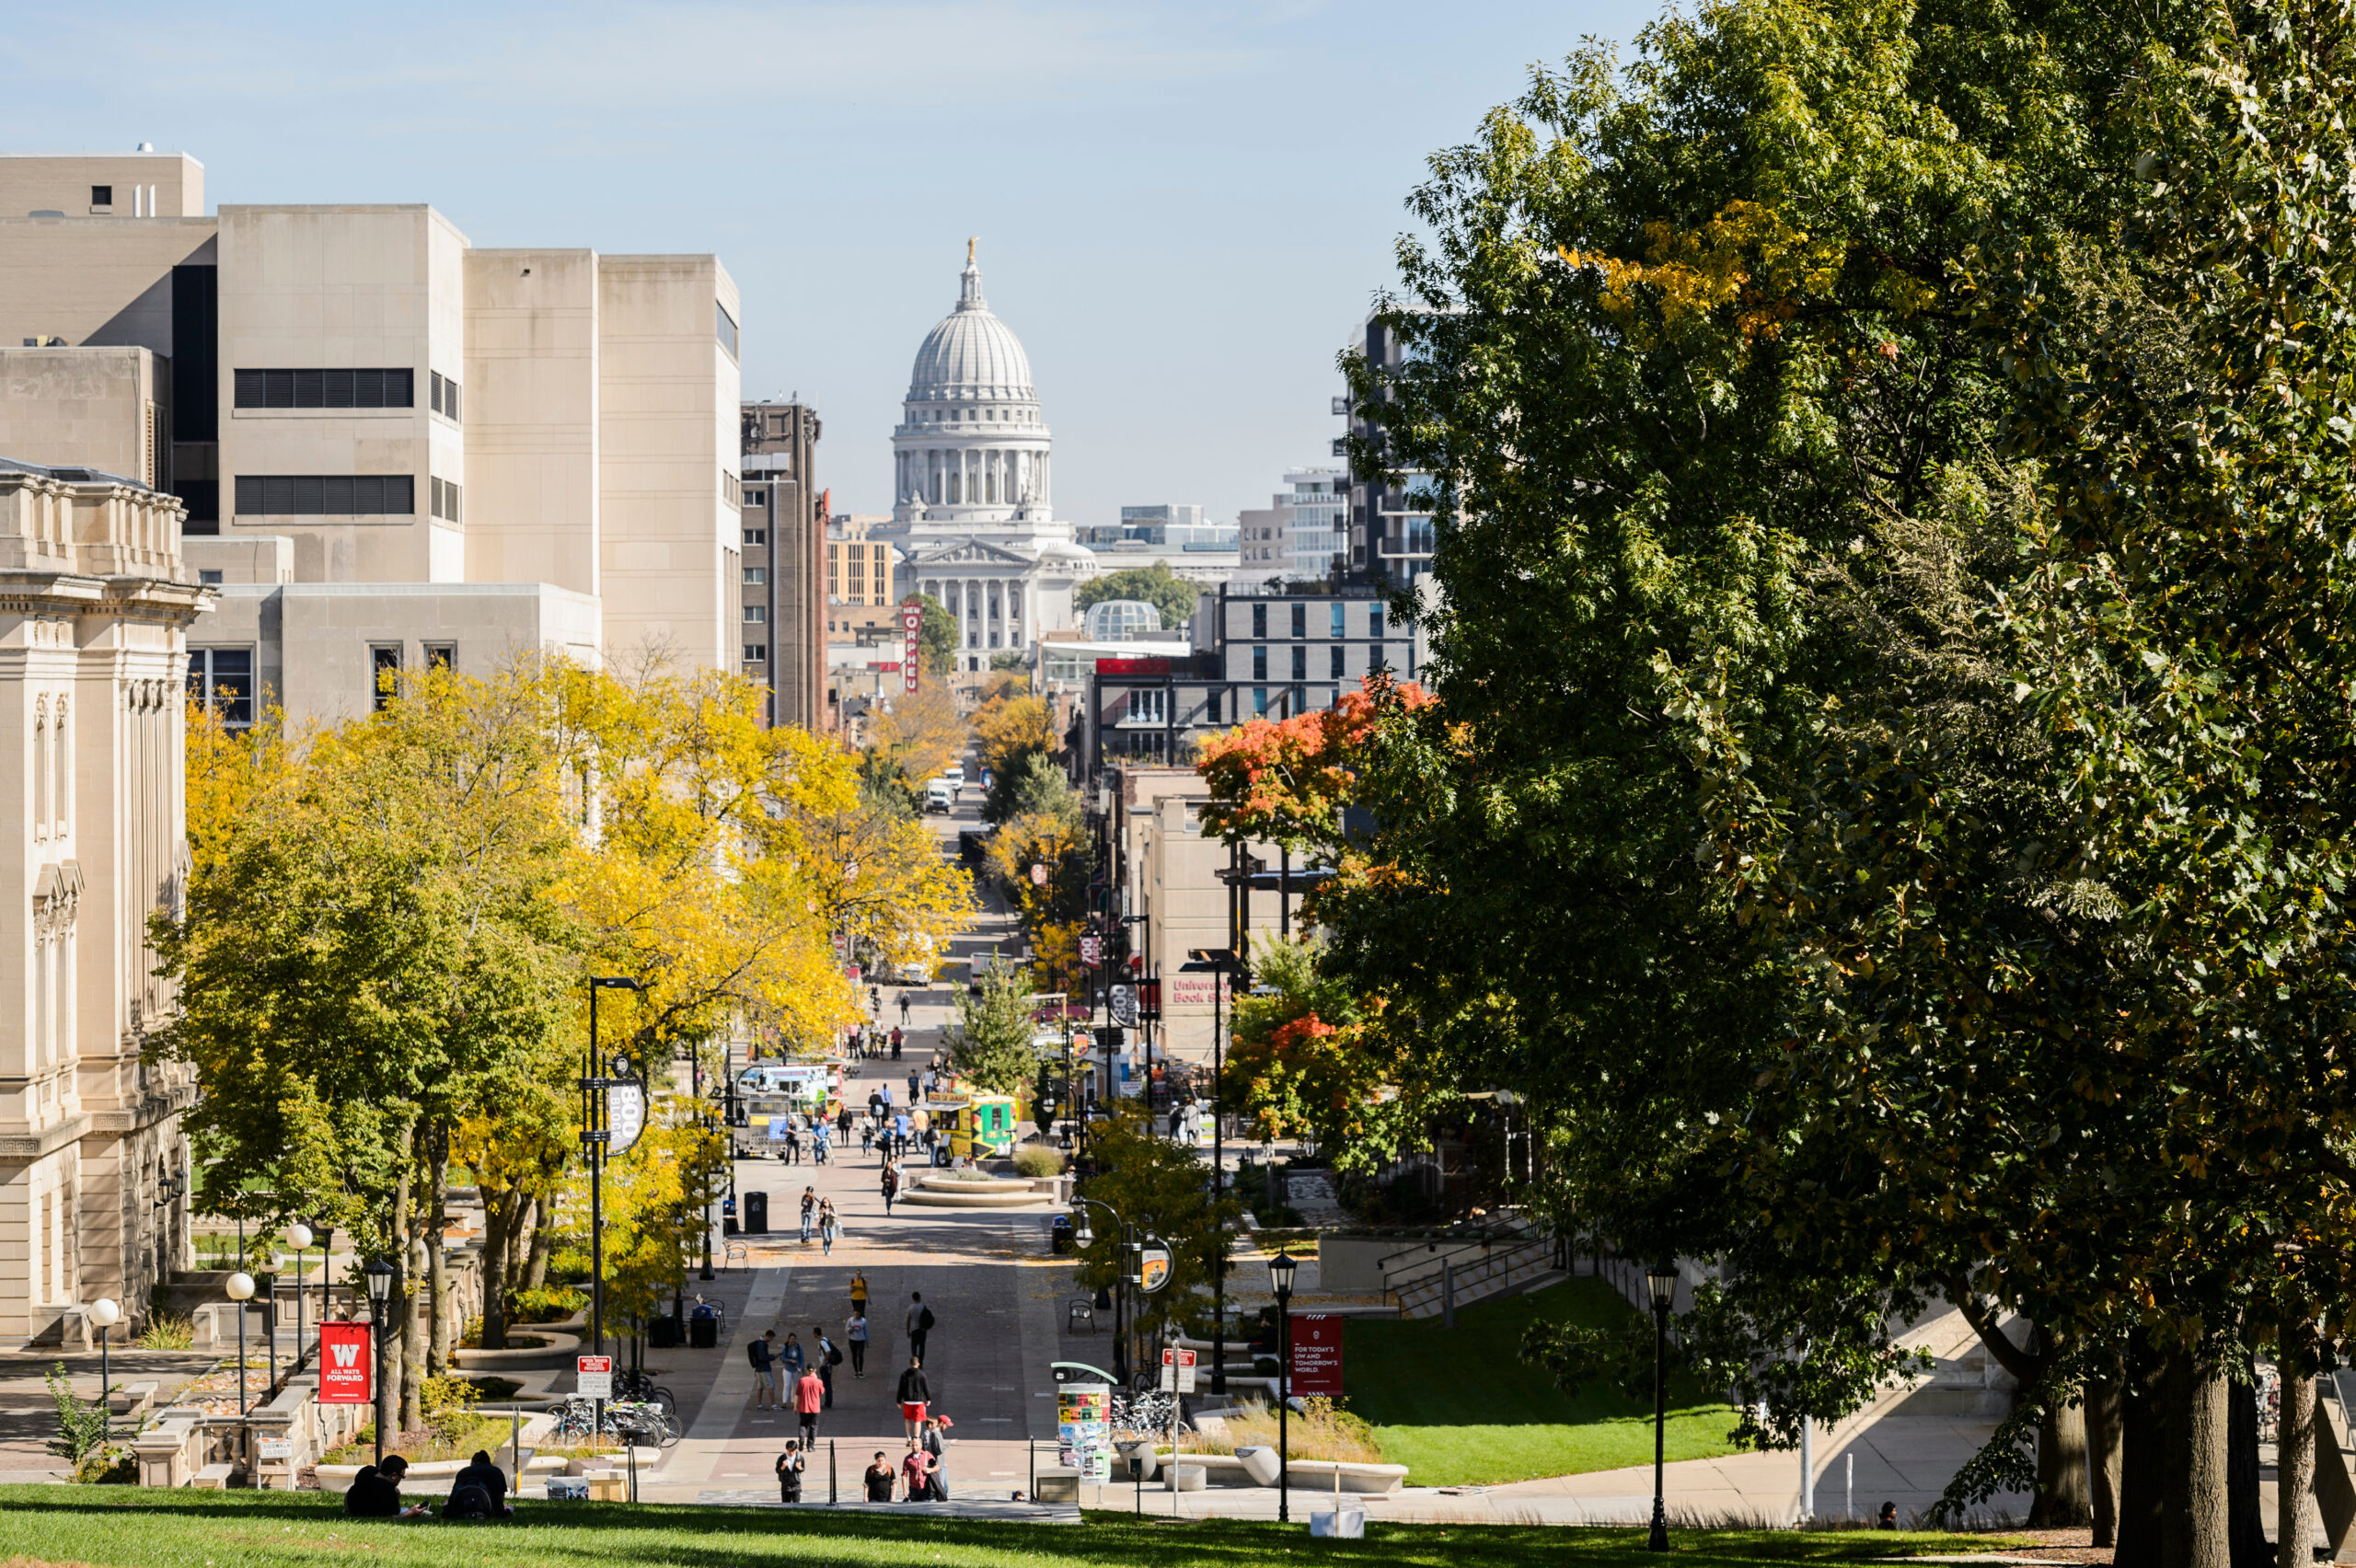 View of capitol from Bascom Hill